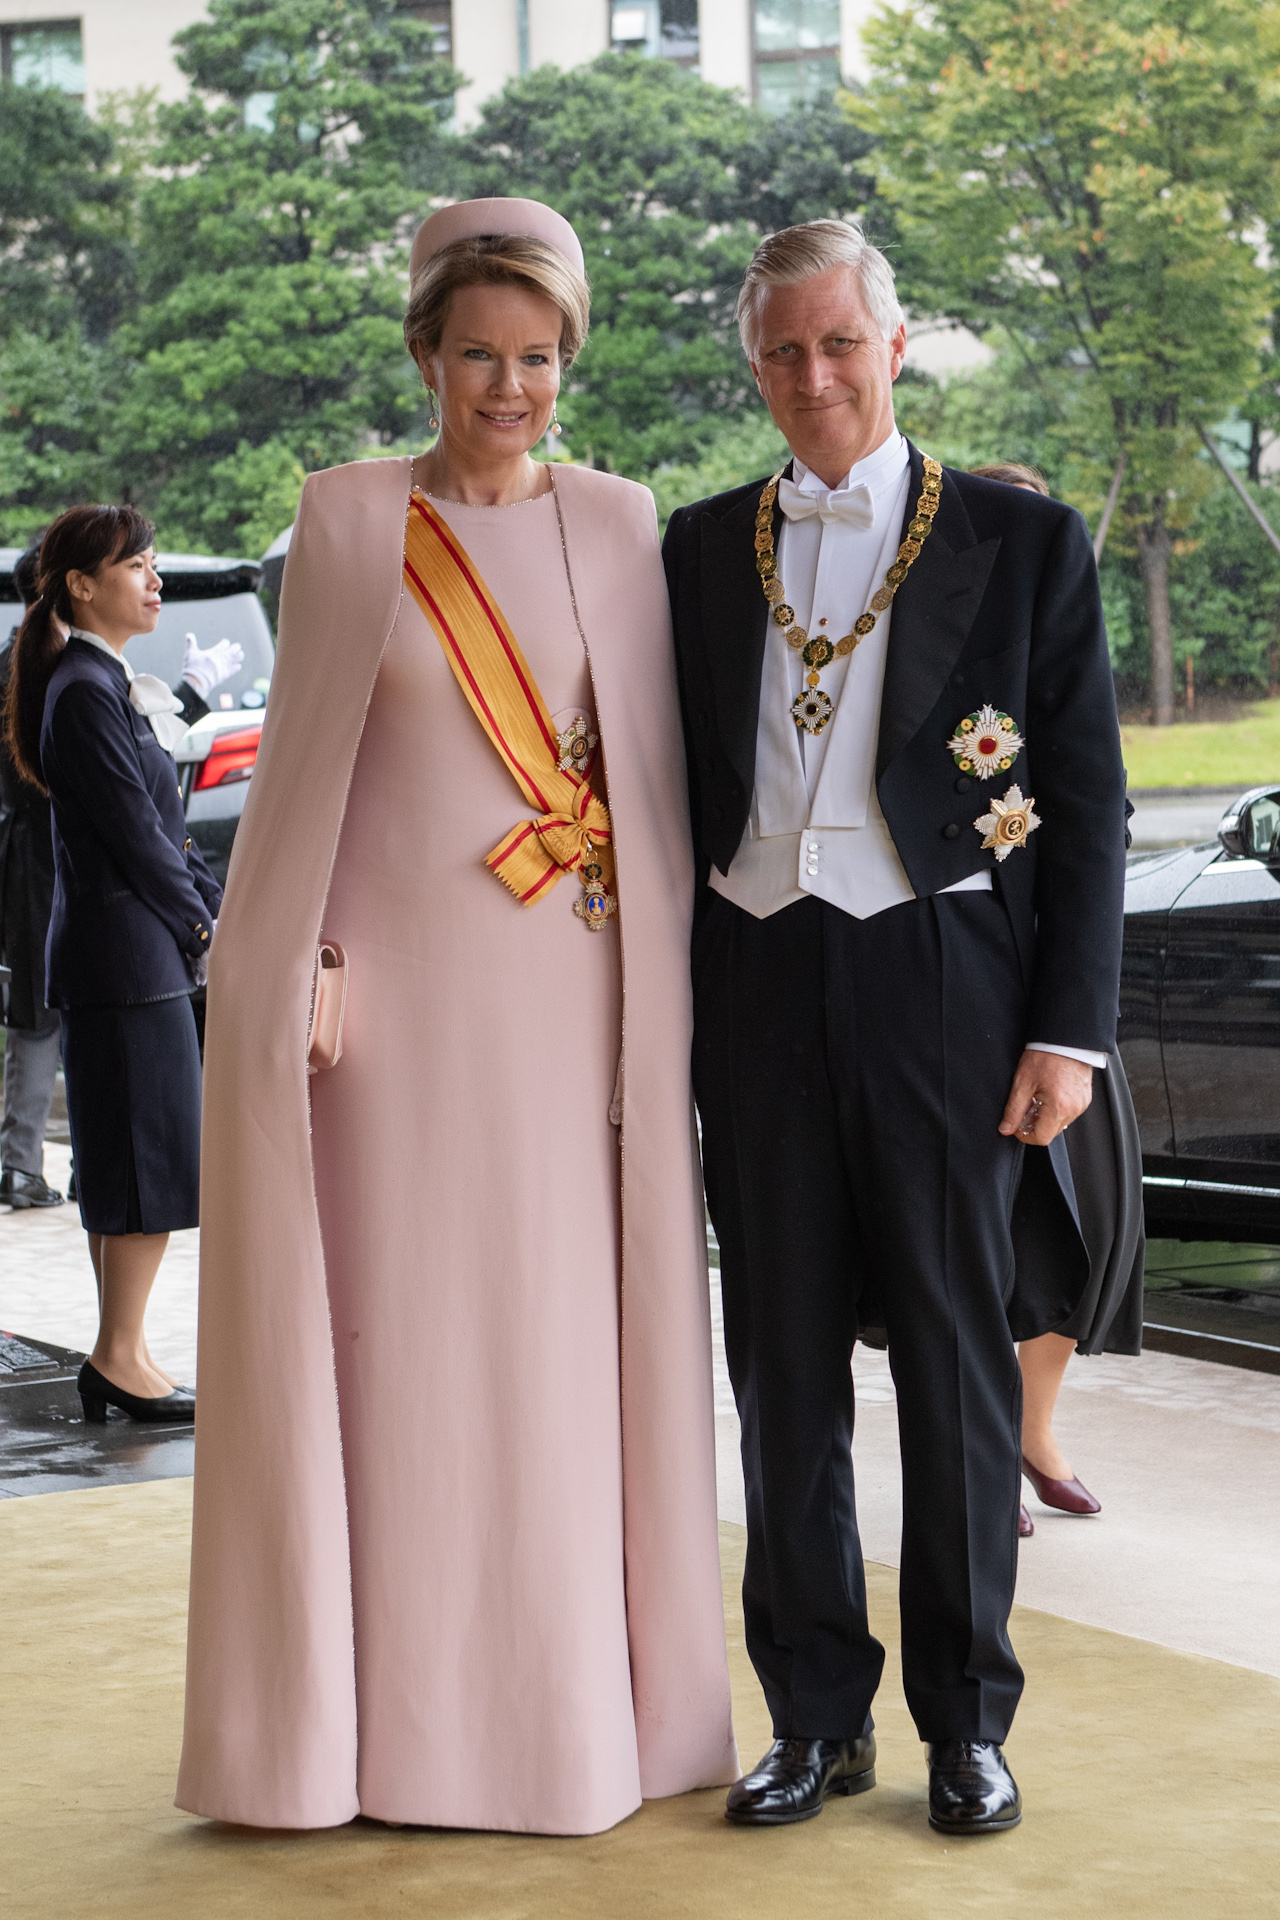 Queen Mathilde lost her sister in a terrible accident